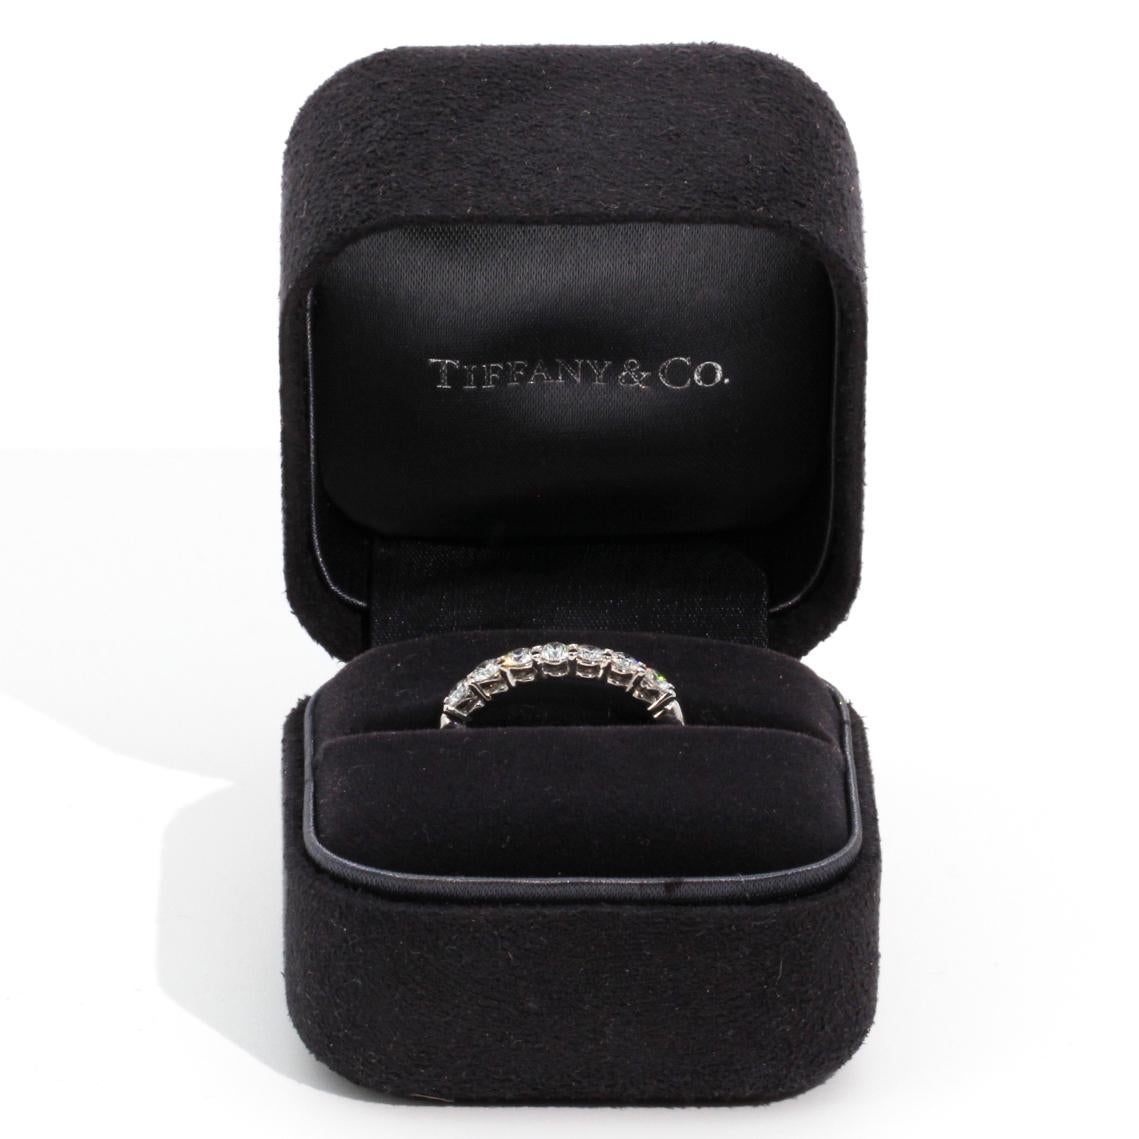 Platinum Tiffany and Co Diamond Embrace Ring has an estimated total of  0.63 carats of sparkling round brilliant cut diamonds. Platinum Tiffany and Co Diamond Embrace Ring is accompanied with the original signature Tiffany and Co navy ring box and